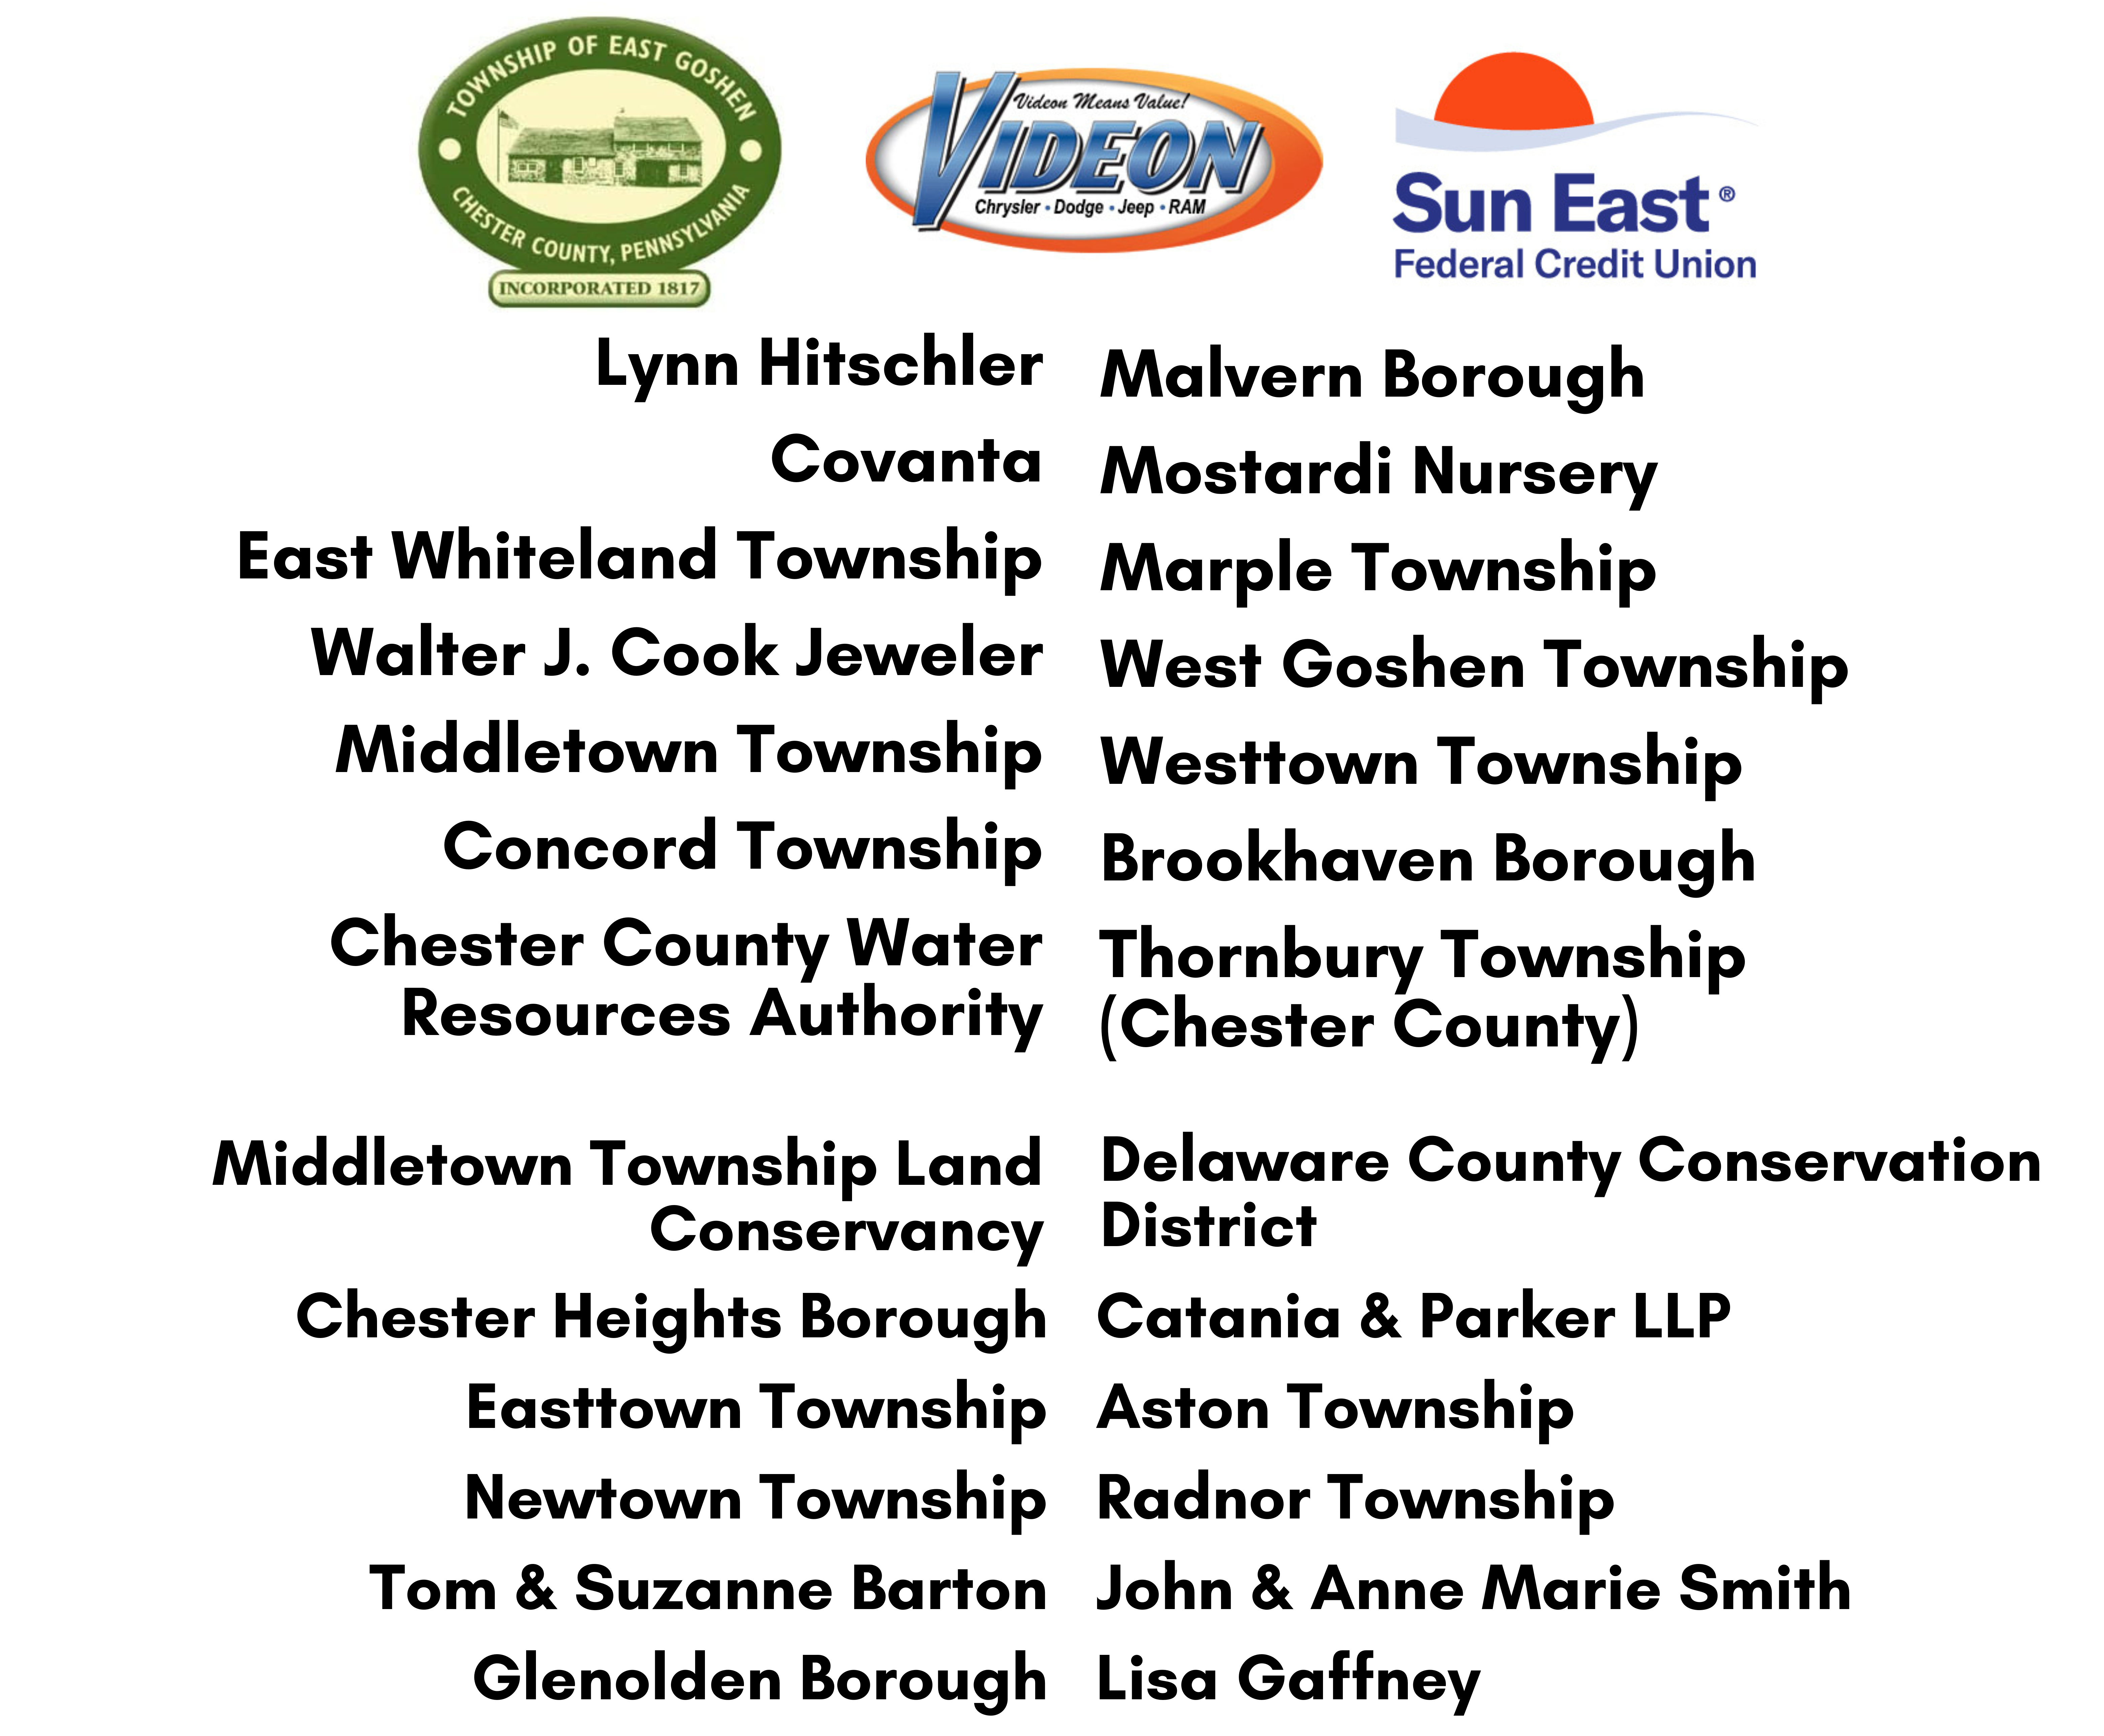 East Goshen Township, Videon, Sun East Federal Credit Union, Lynn Hitschler, Convanta, East Whiteland Township, Walter J. Cook Jeweler, Middletown Township, Concord Township, Chester County Water Resources Authority, Malvern Borough, Mostardi Nursery, Marple Township, West Goshen Township, Westtown Township, Brookhaven Borough, Thornbury Township (Chester County), Middletown Township Land Conservancy, Chester Heights Borough, Easttown Township, Newtown Township, Tom & Suzanne Barton, Glenolden Borough, Delaware County Conservation District, Catania & Parker LLP, Aston Township, Radnor Township, John & Anne Marie Smith, Lisa Gaffney